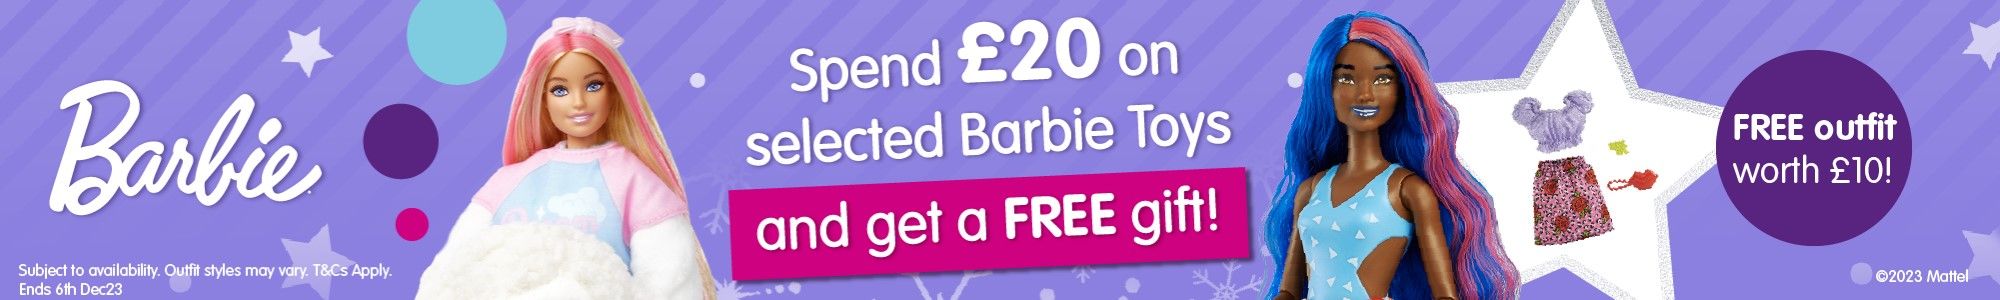 Barbie free gift when you spend over £20 on selected toys whilst stock last